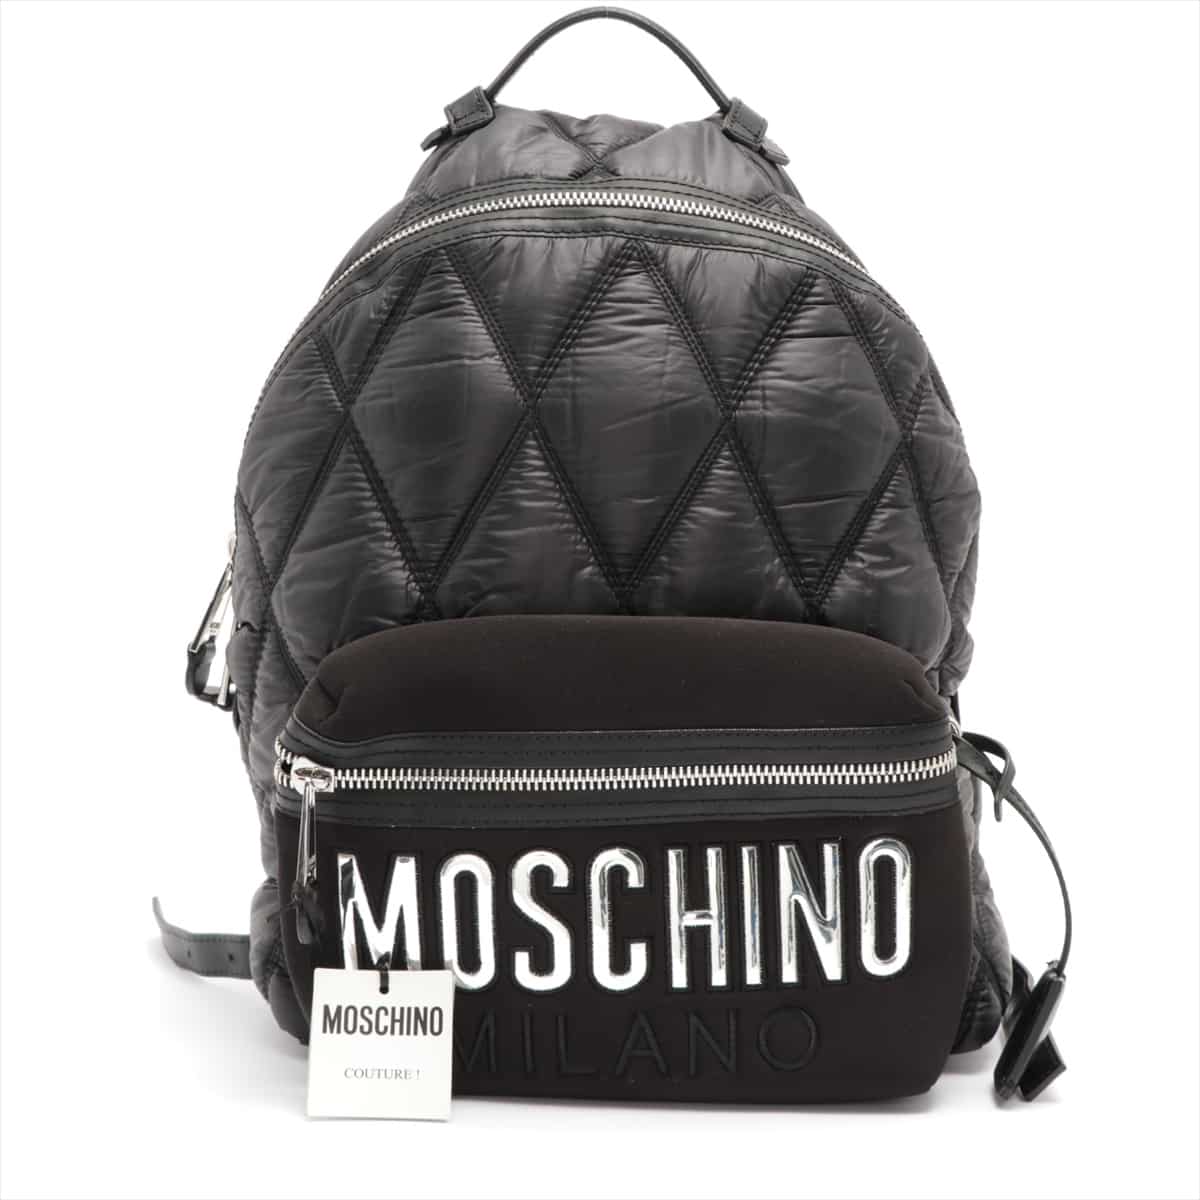 Moschino quilting Nylon & Leather Backpack Black B7604 8207